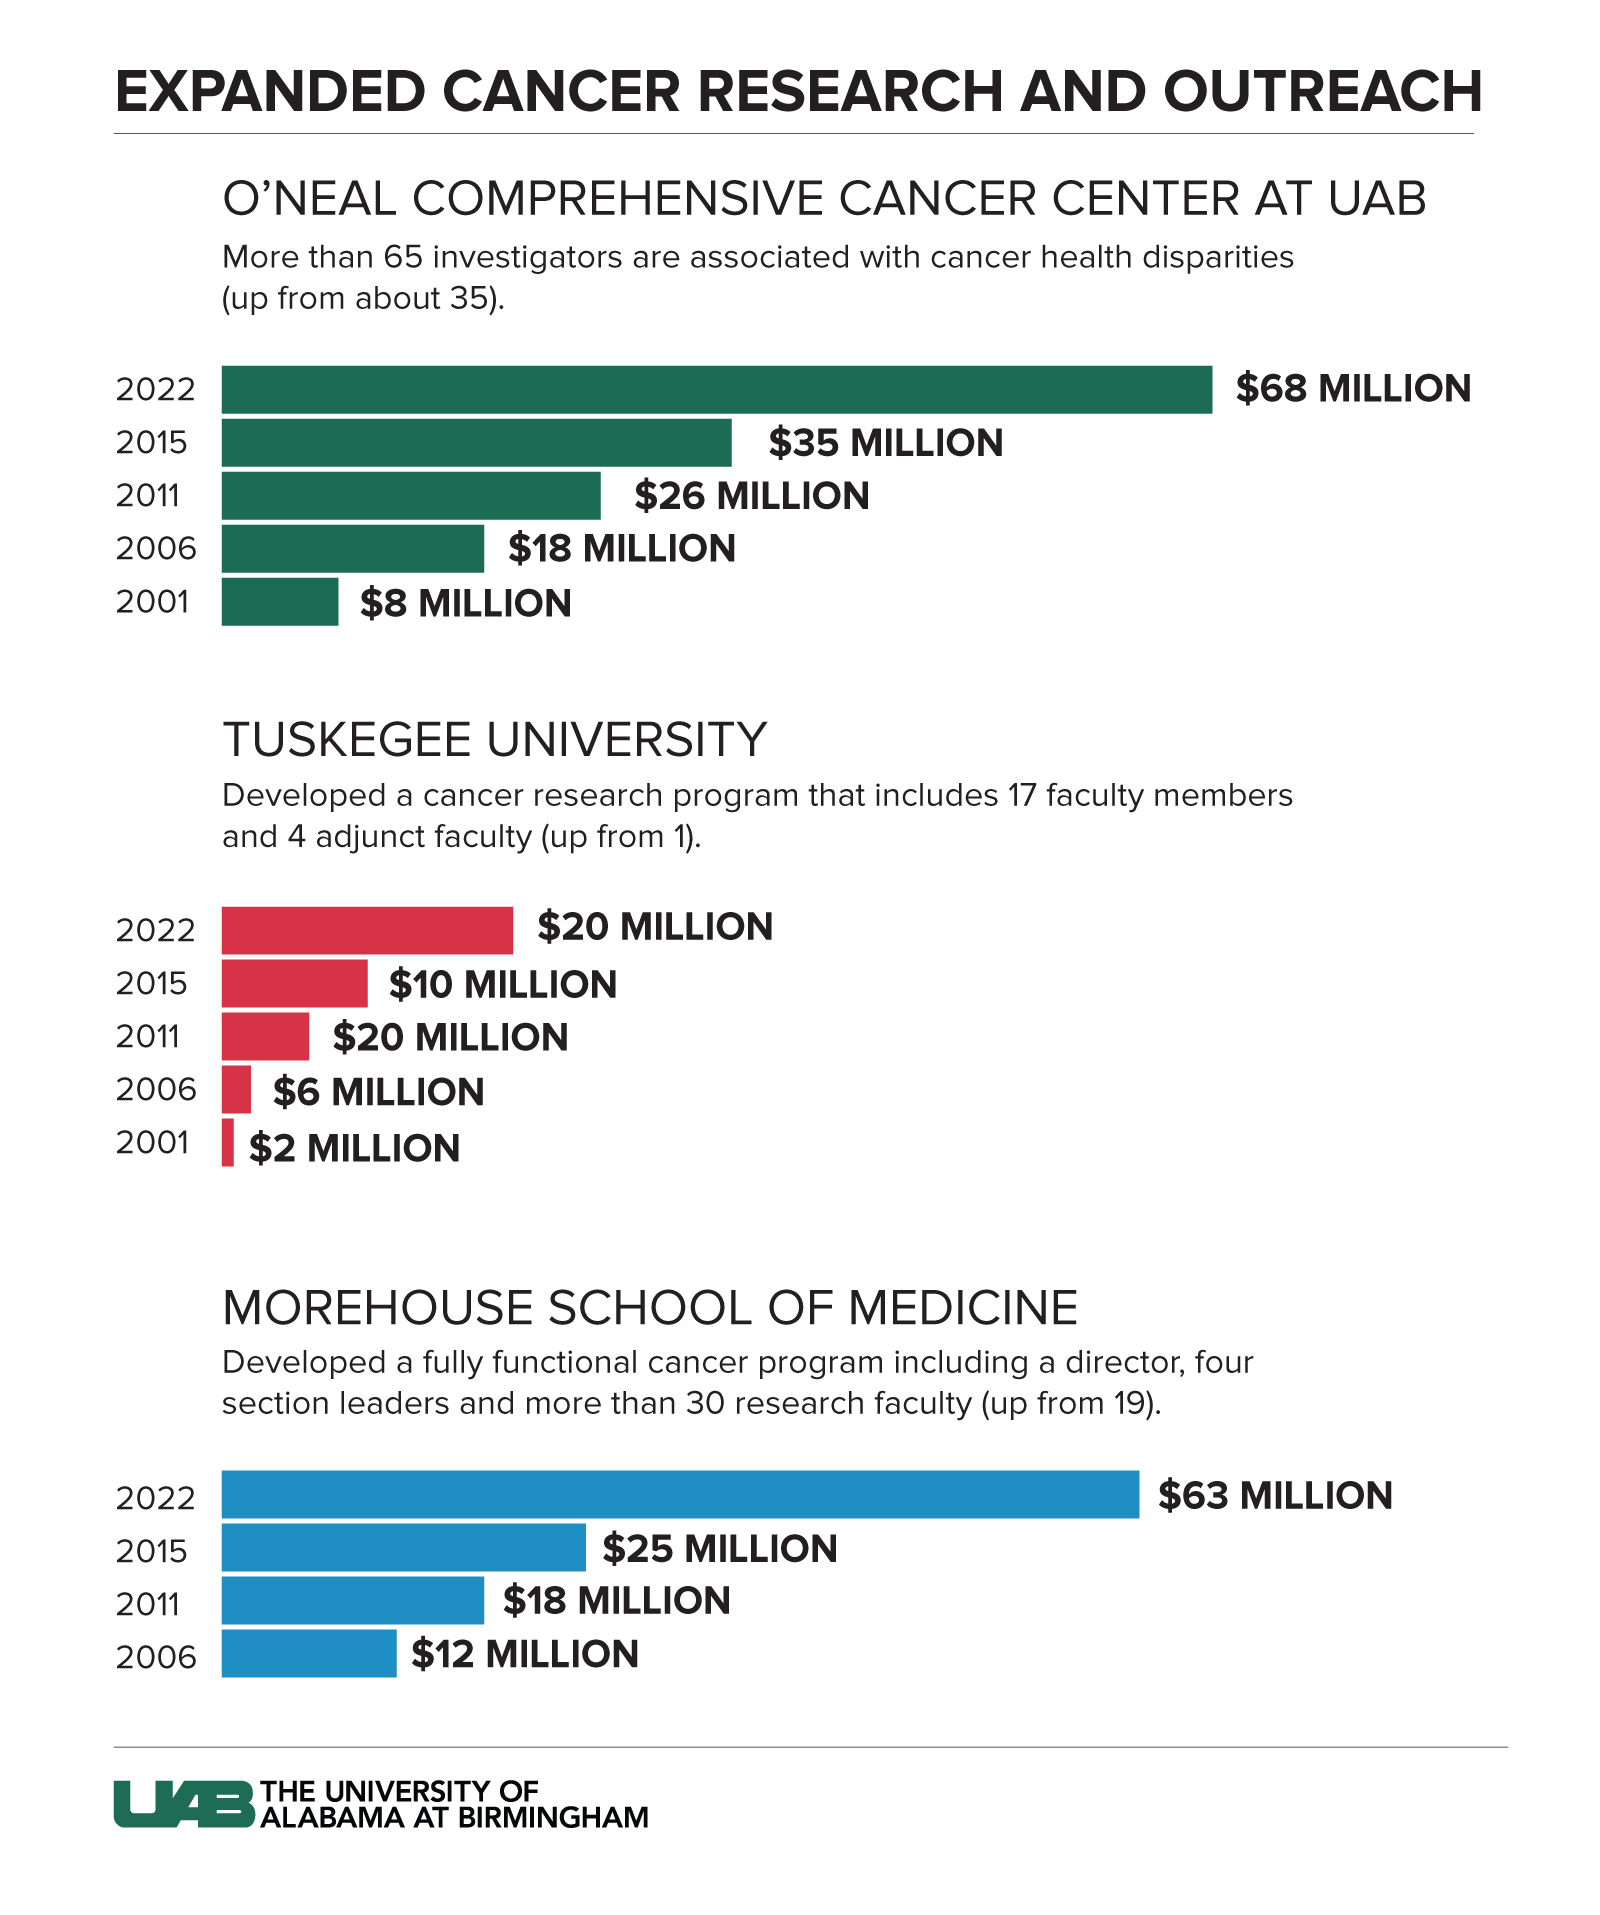 Chart showing expanded cancer research and outreach.